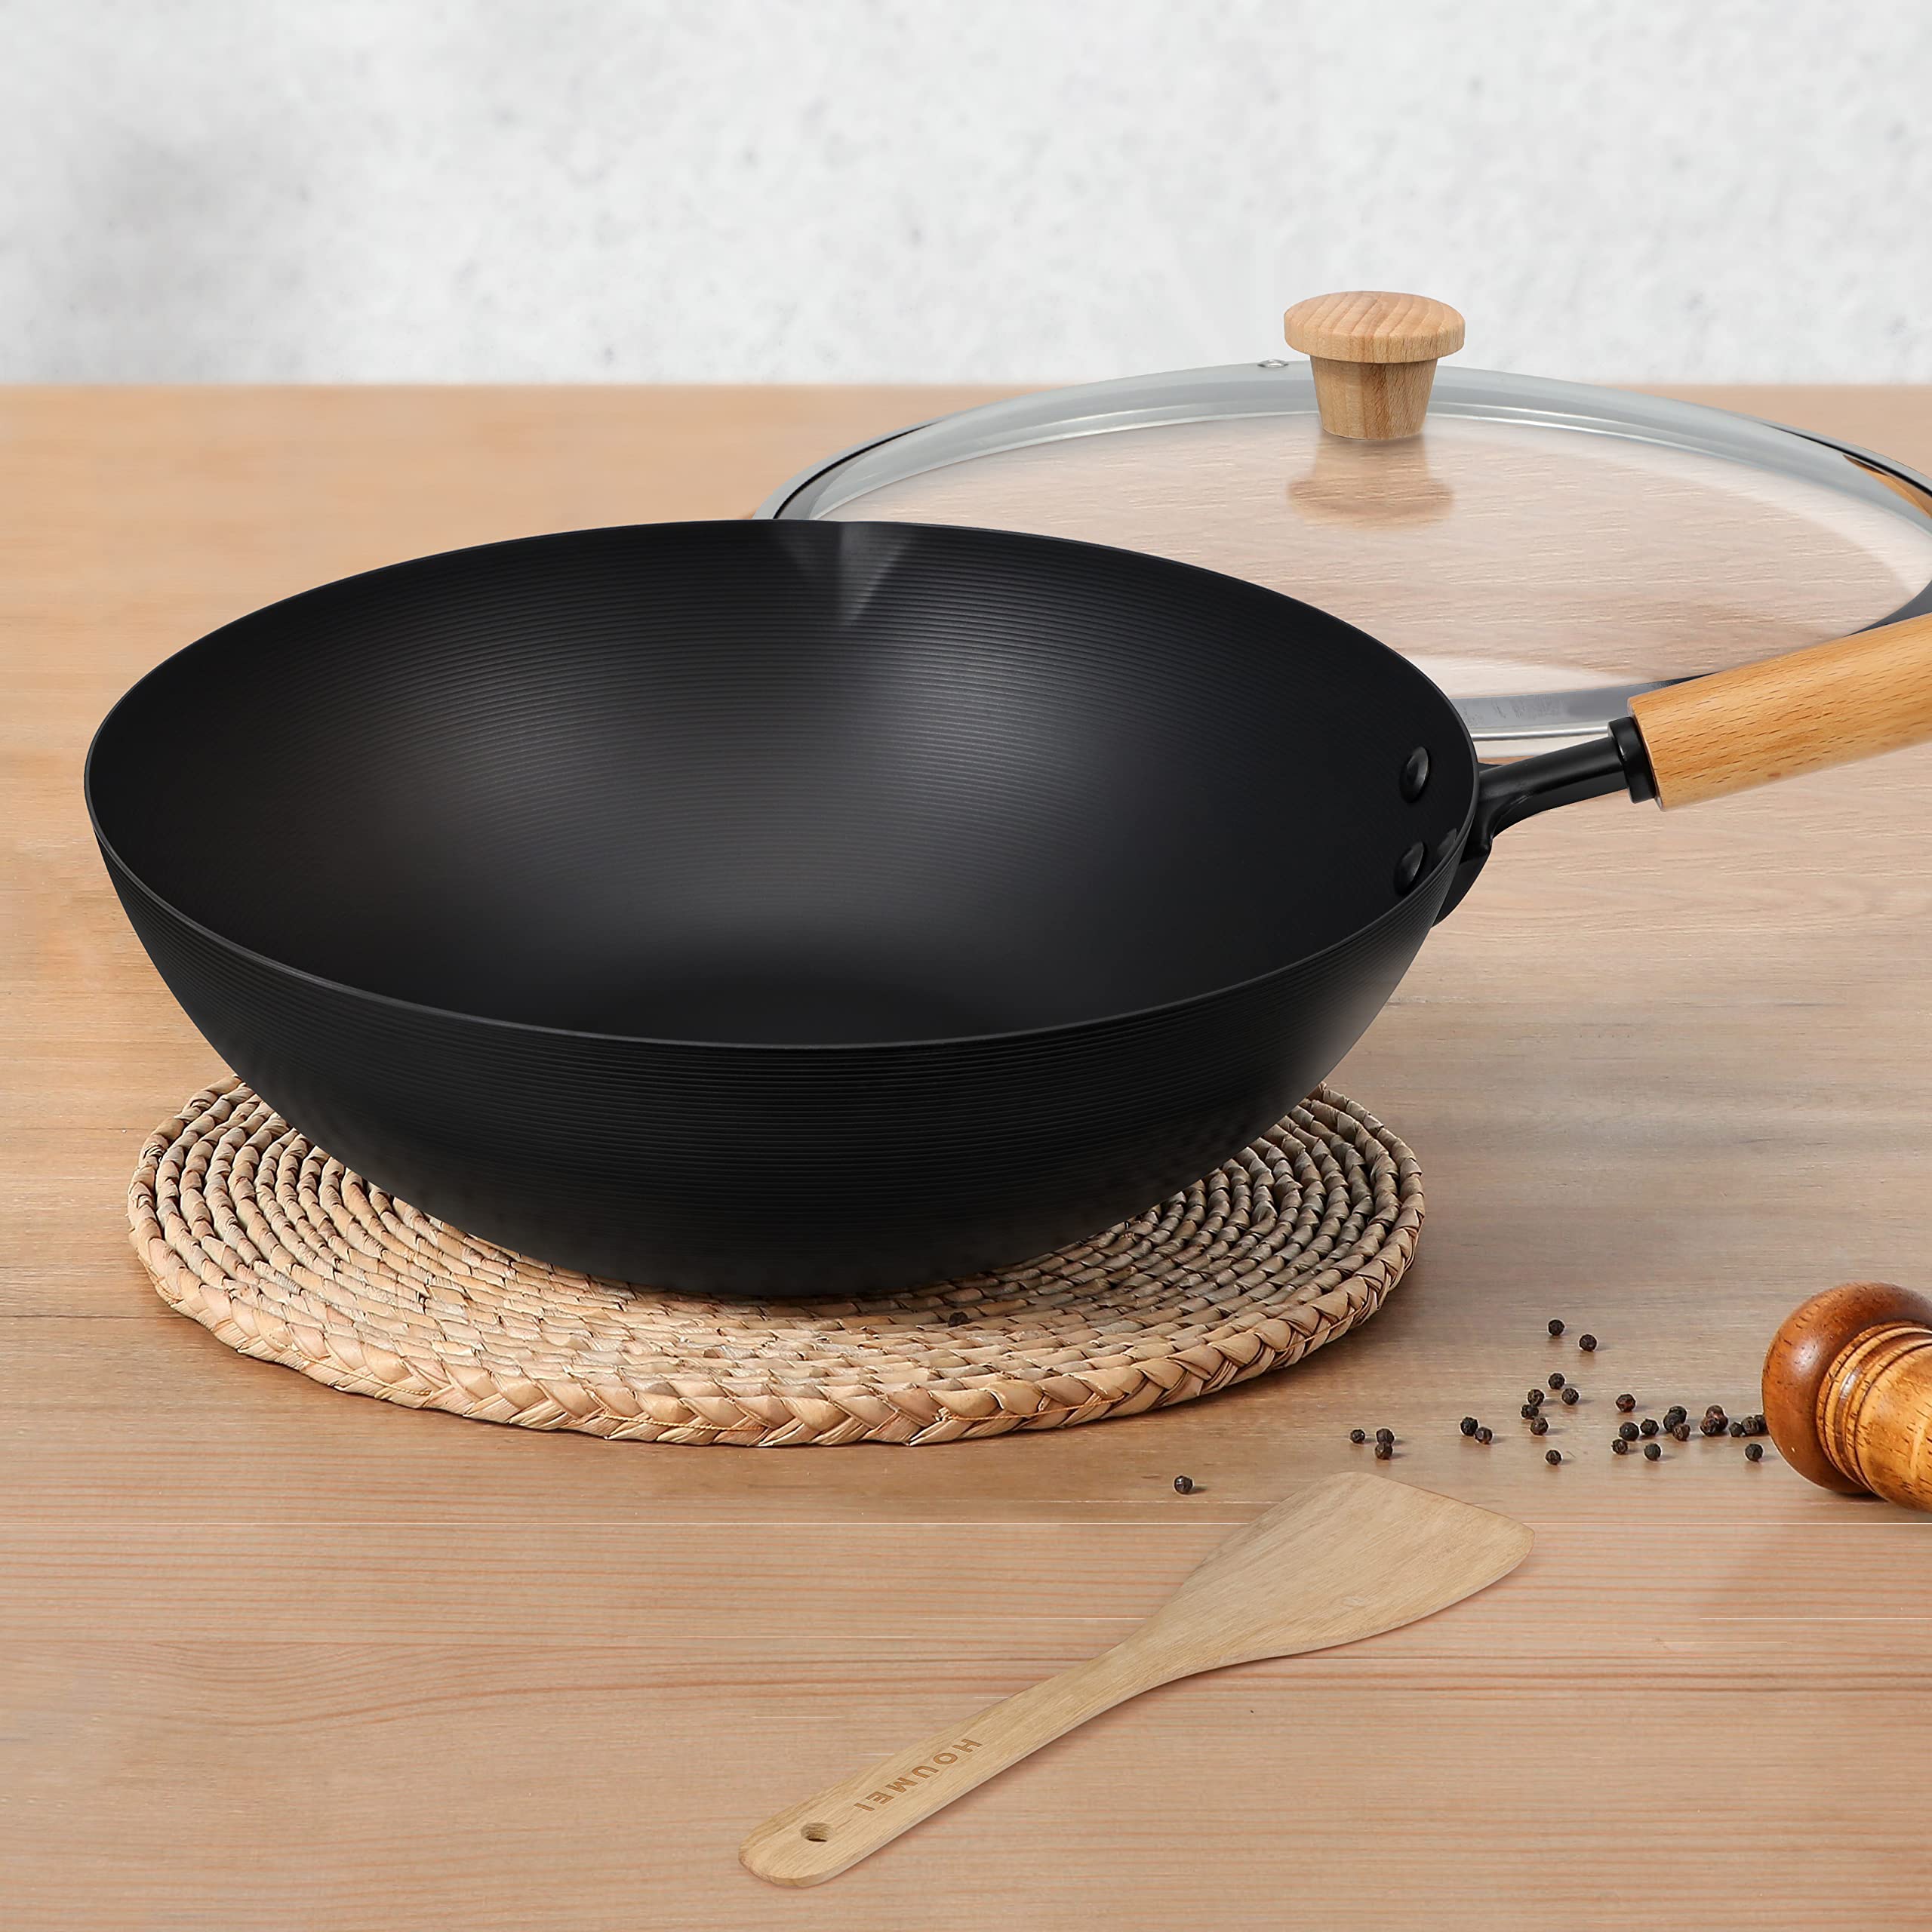 Carbon Steel Wok Pot with Lid, Nonstick Stir Frying Pan with Flat Bottom for Braising and Deep Frying, Pre-Seasoned Chinese Cooking Pan Suitable for Electric, Induction & Gas Stoves(32cm/12.6")